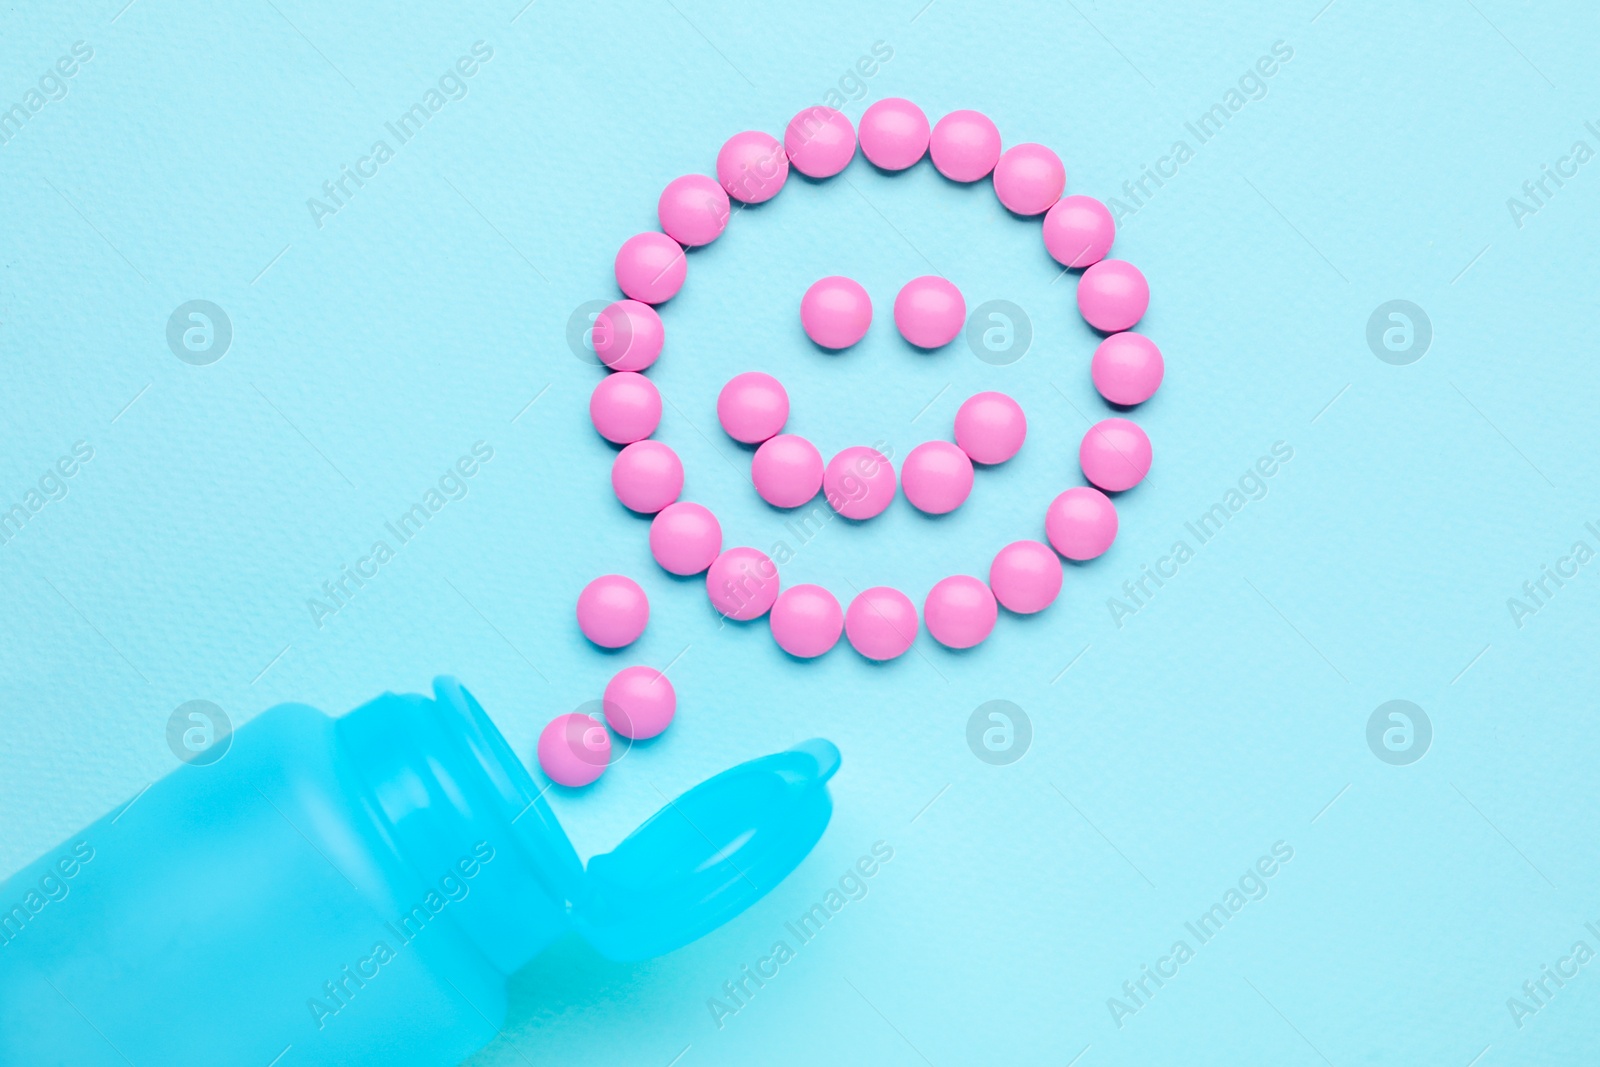 Photo of Happy emoticon made of antidepressants and medical bottle on light blue background, flat lay